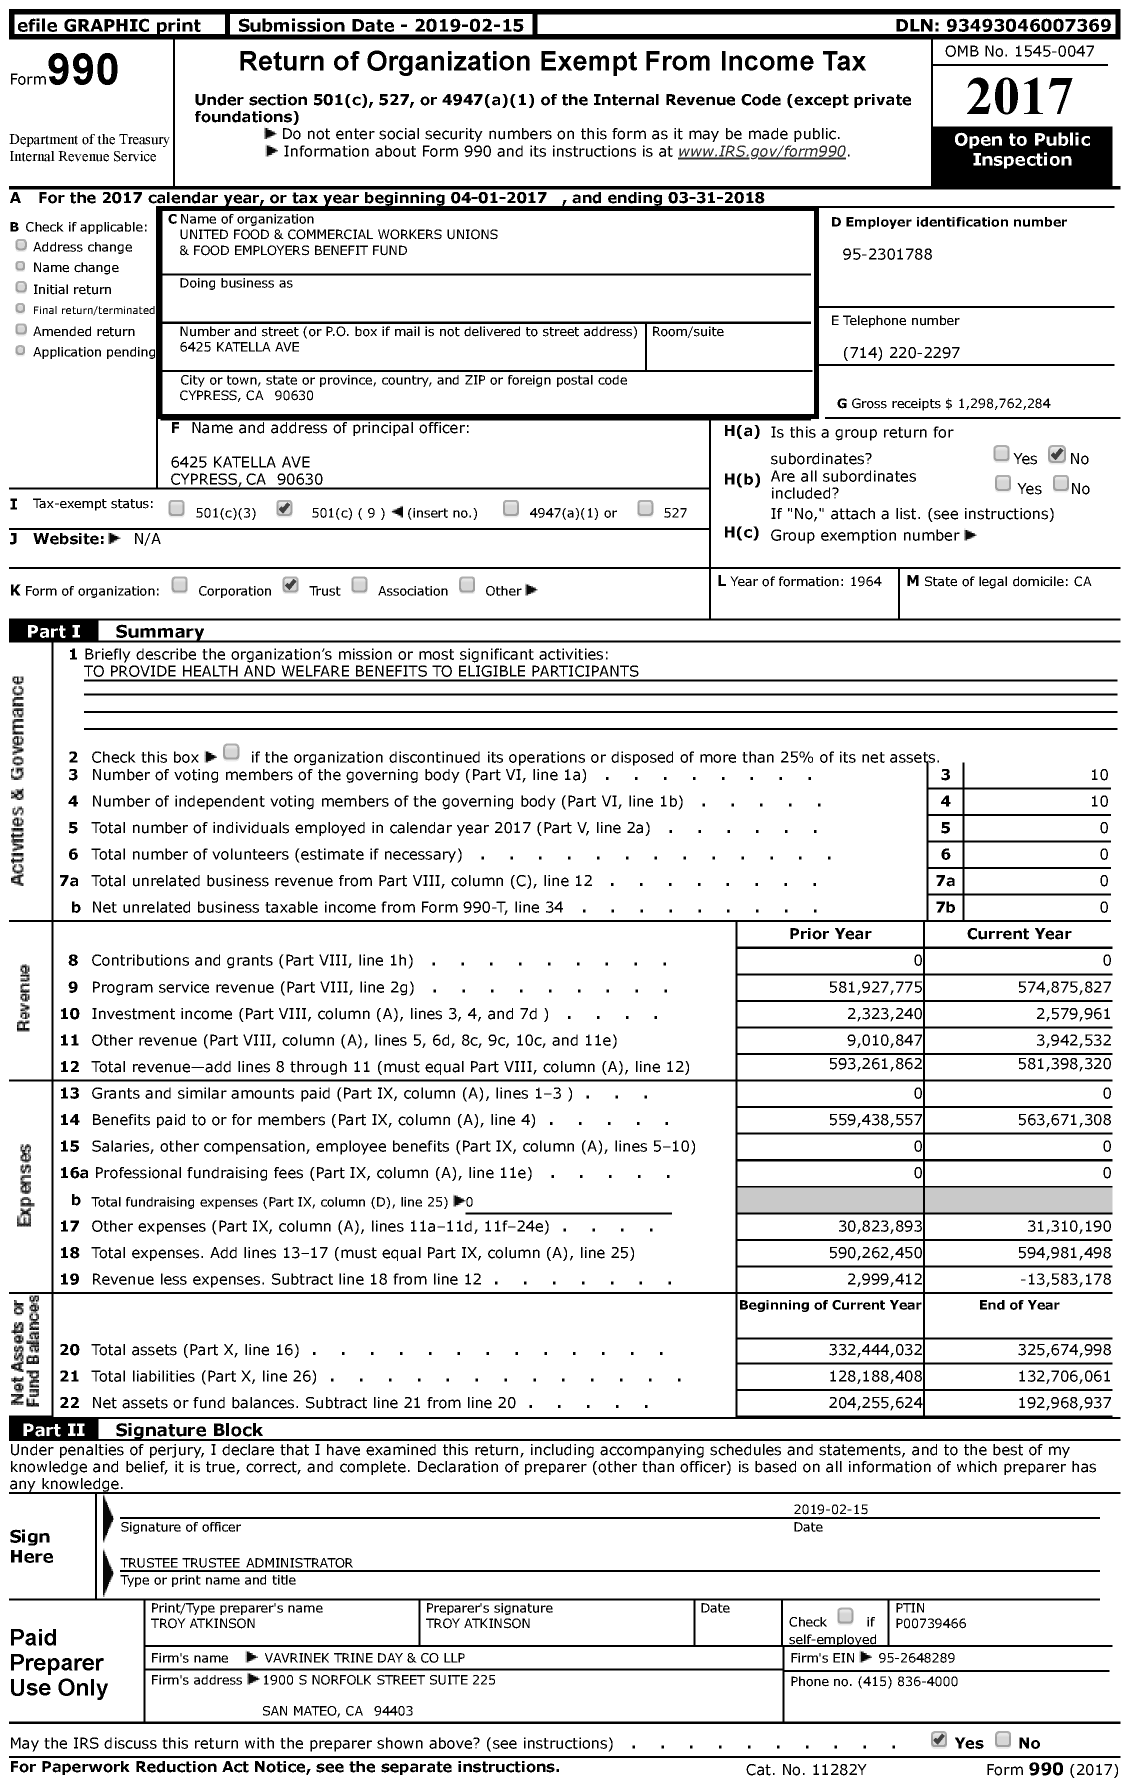 Image of first page of 2017 Form 990 for United Food and Commercial Workers Unions and Food Employers Benefit Fund